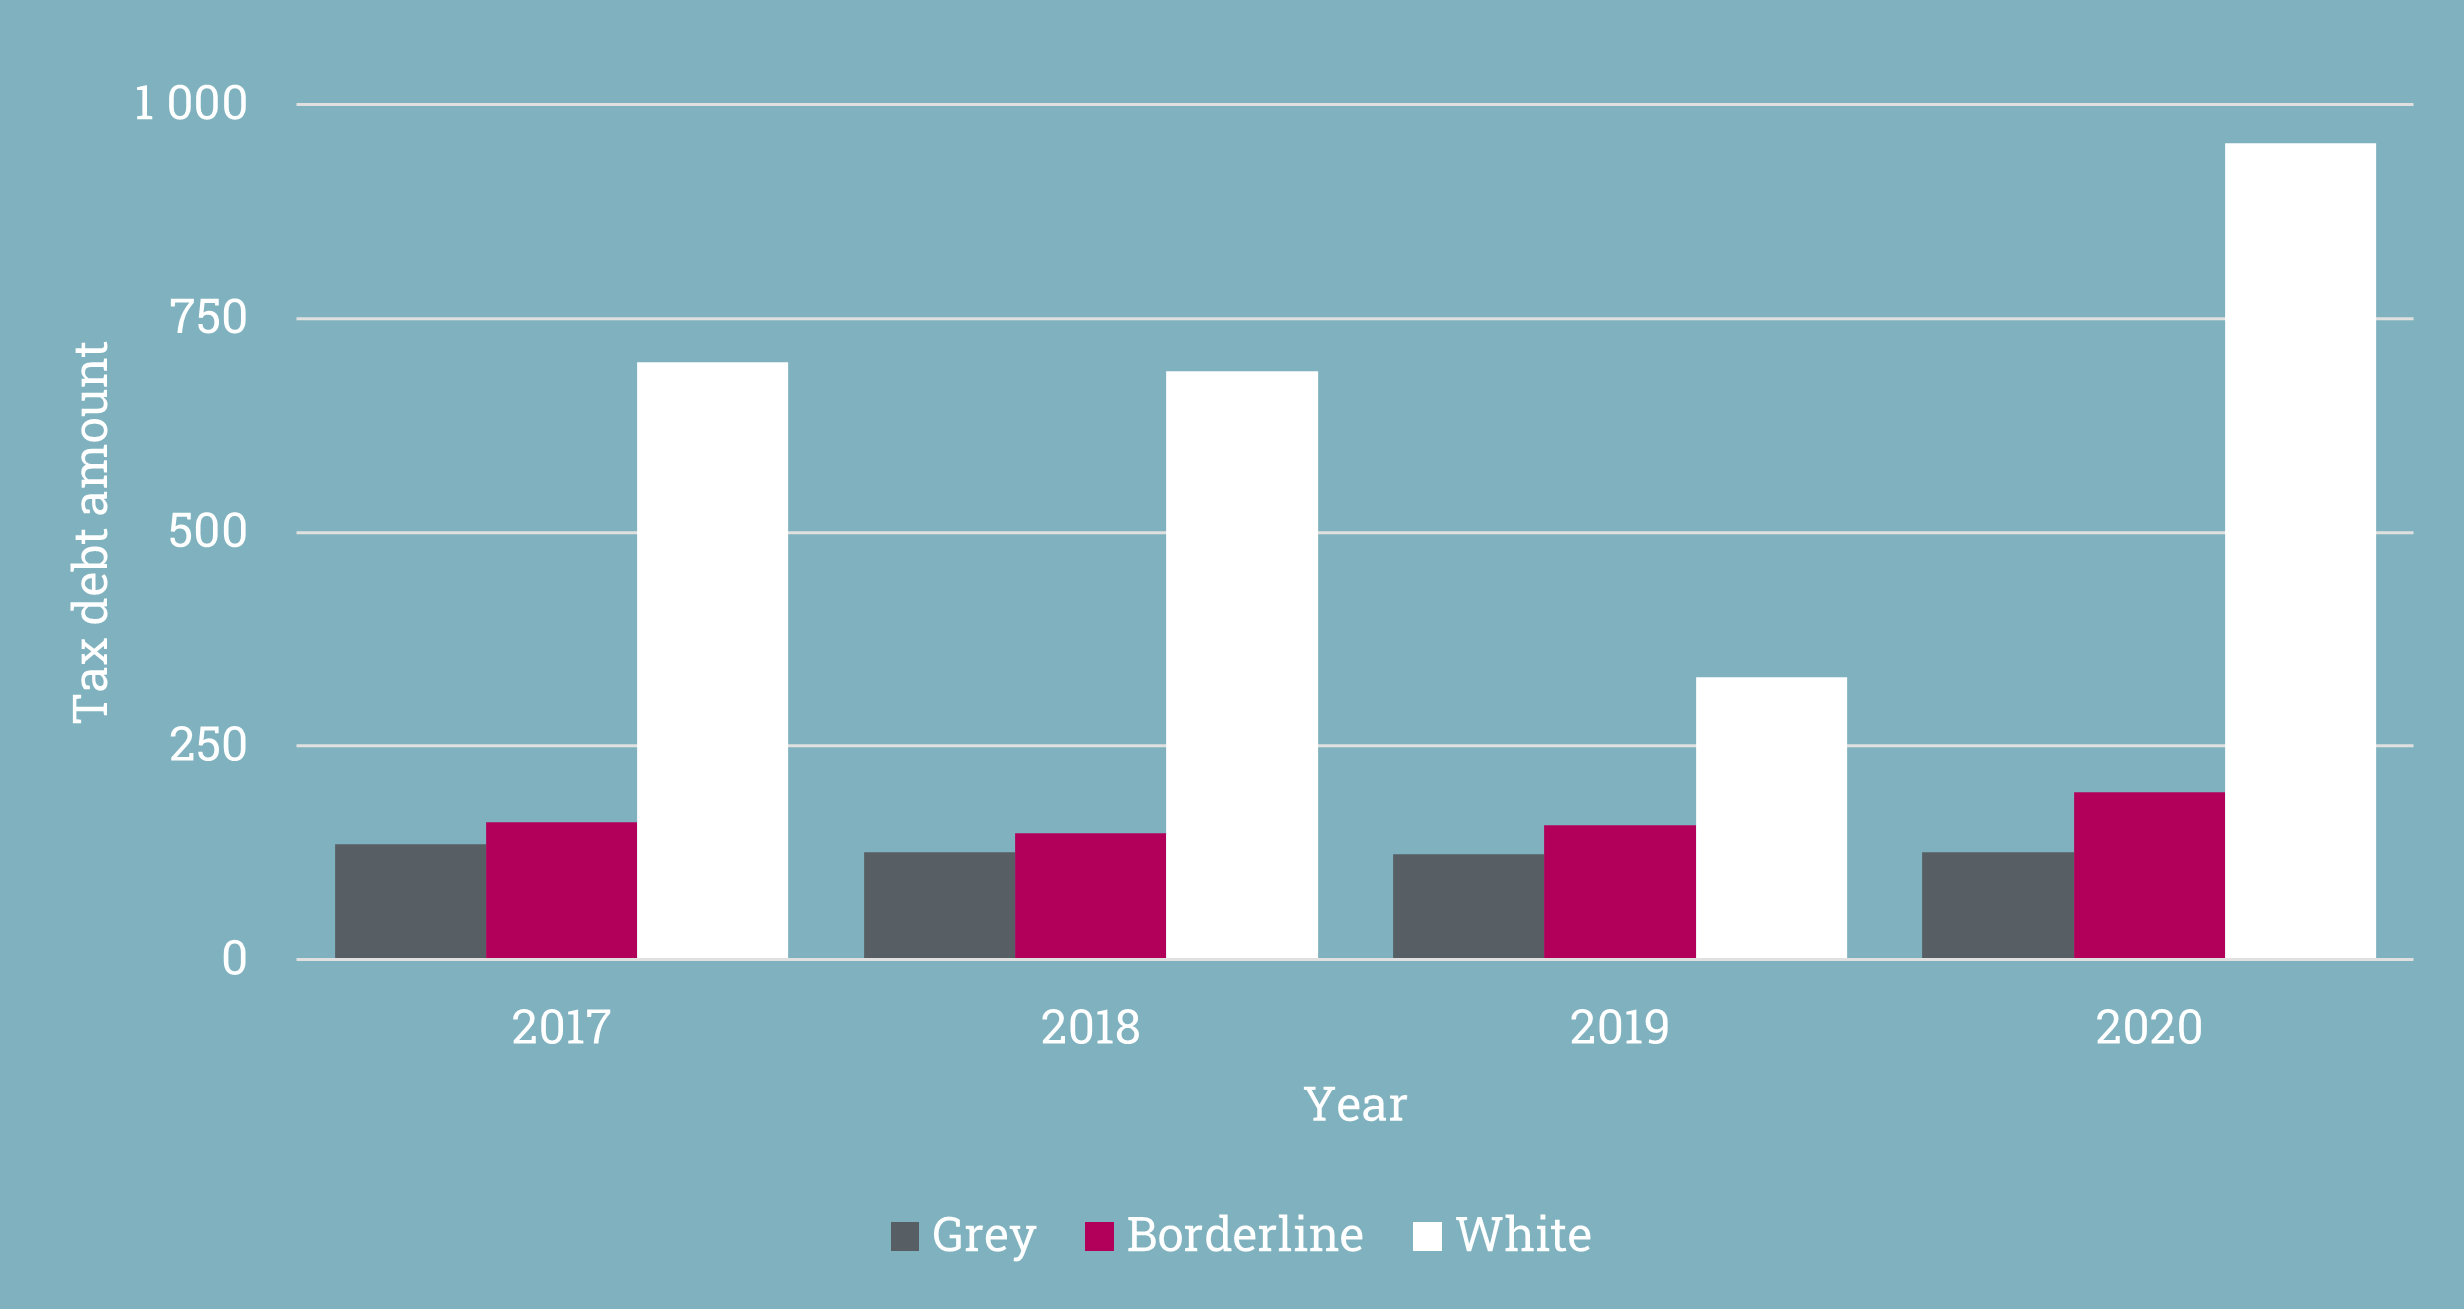 Tax debt amount by grey, borderline and white companies